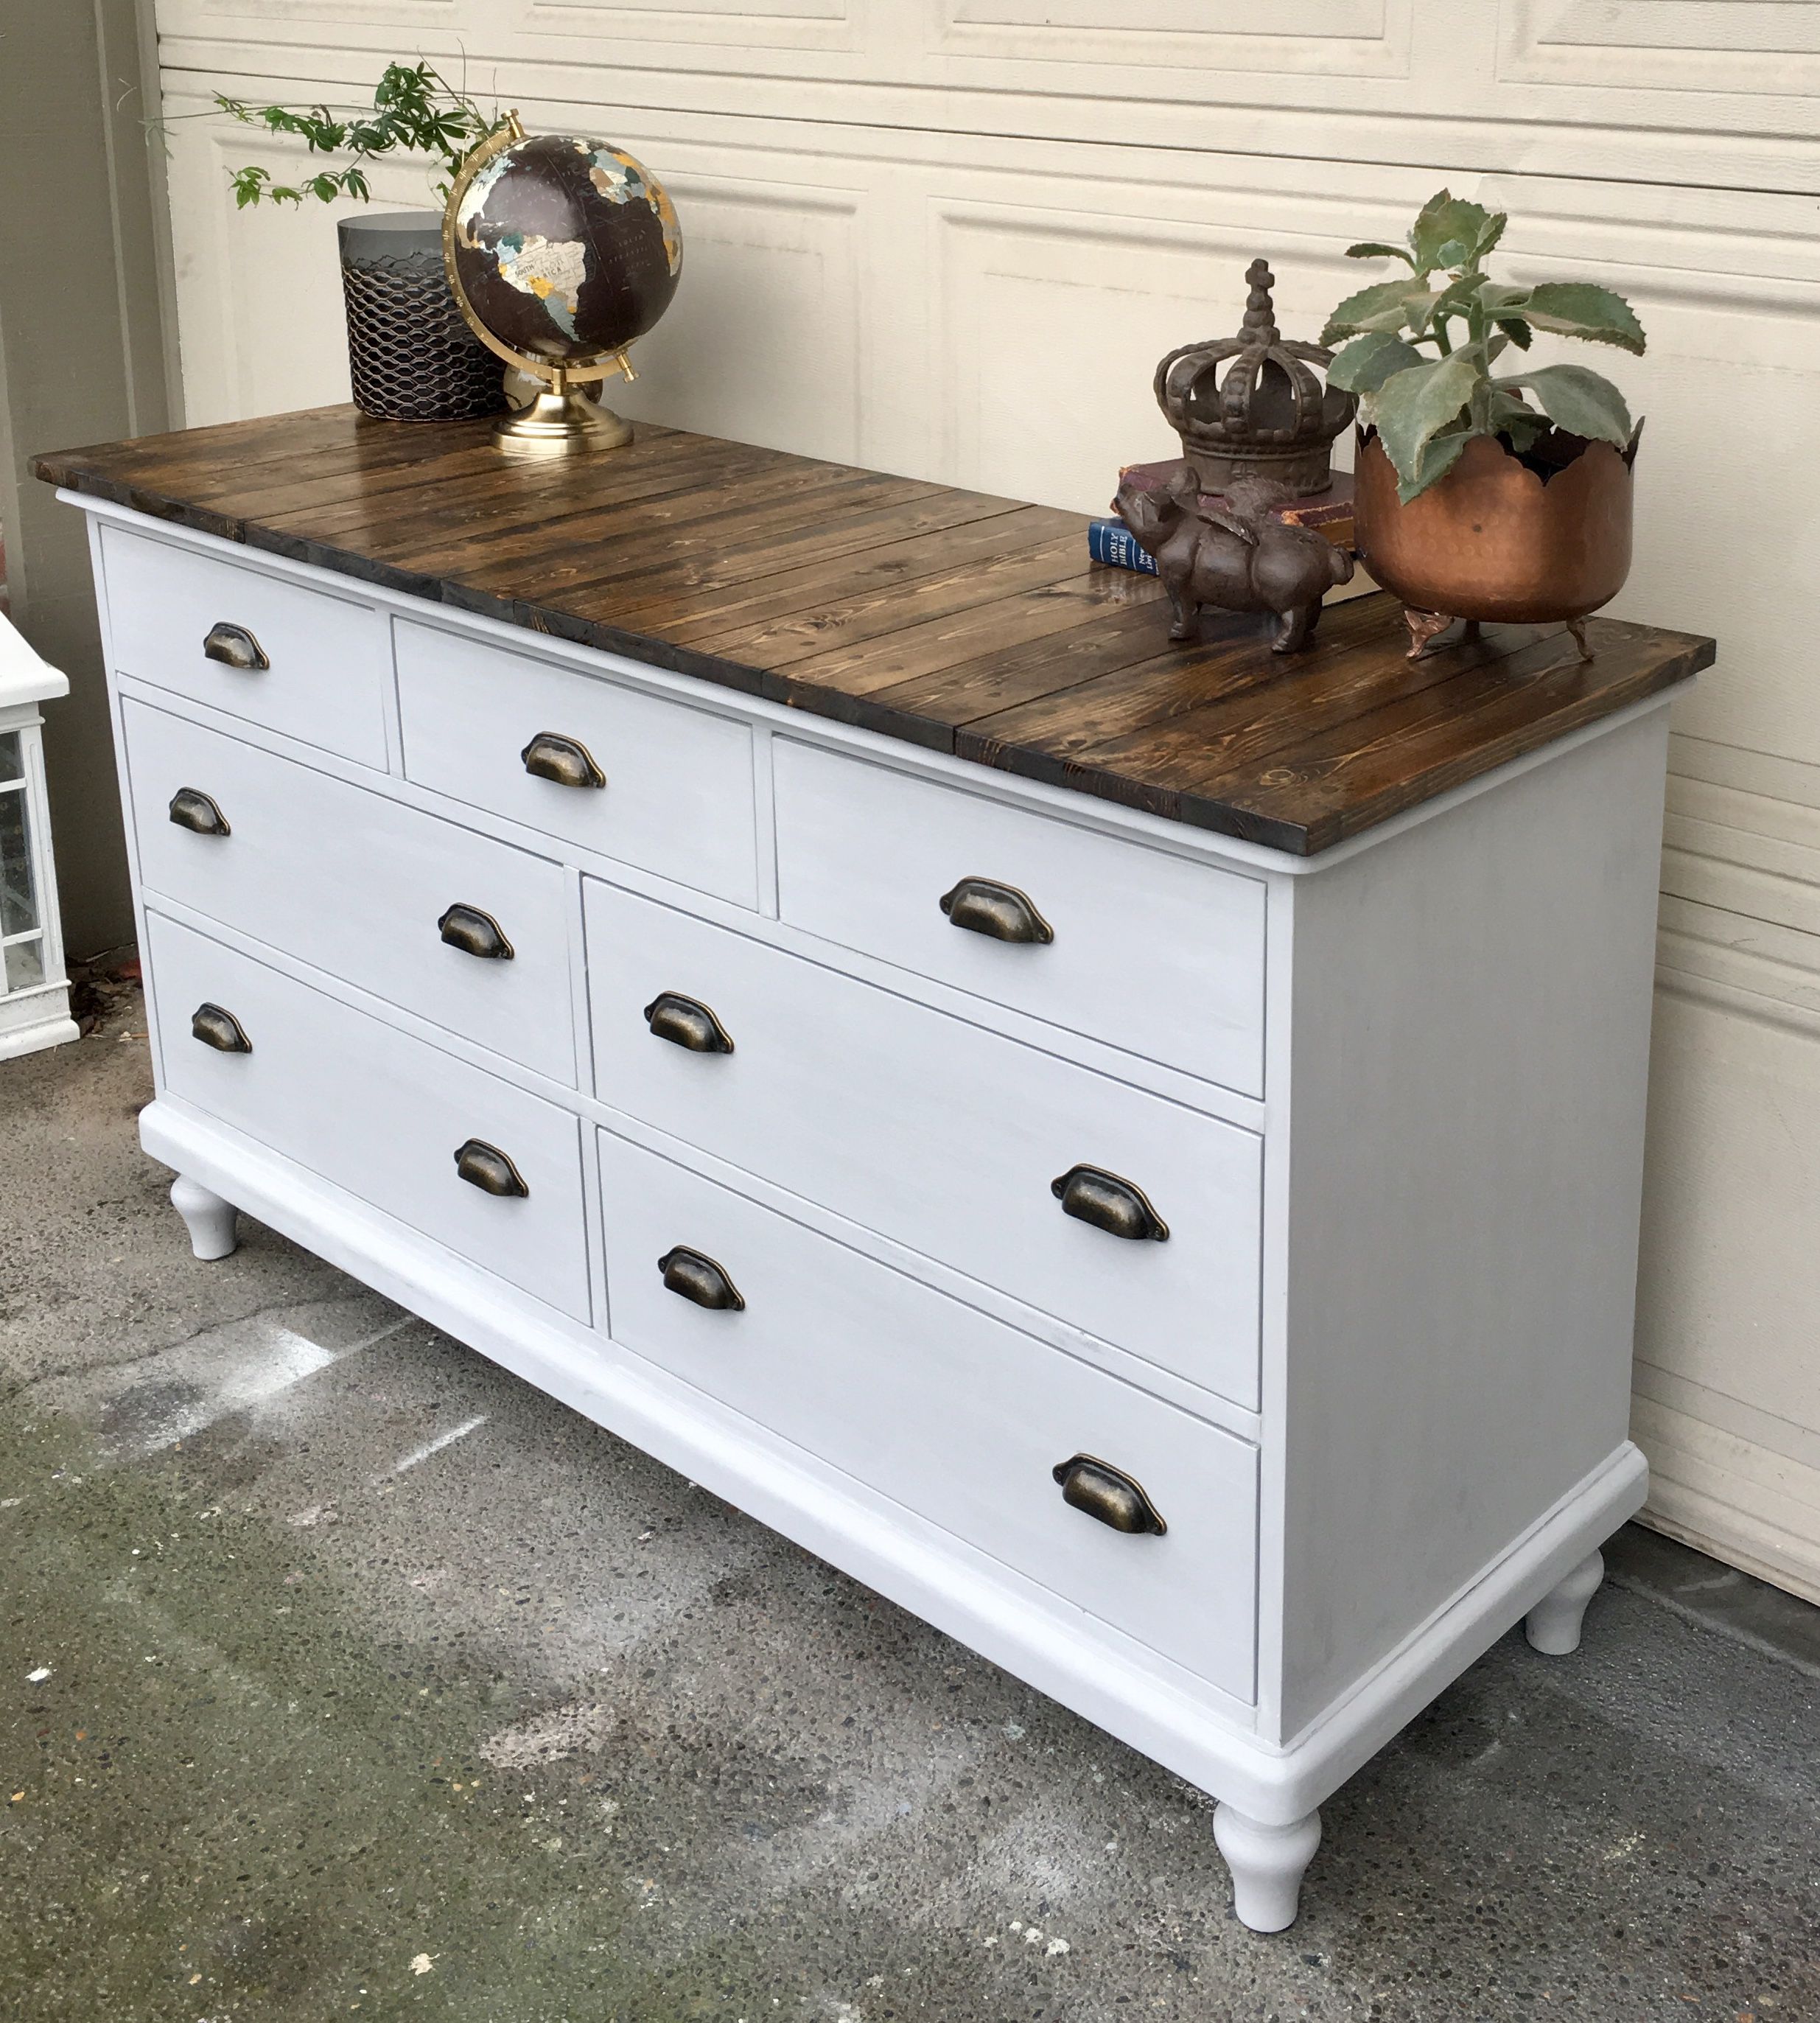 Pottery Barn Fireplace Beautiful Refinished Pottery Barn Dresser Painted In Grey Chalk Paint